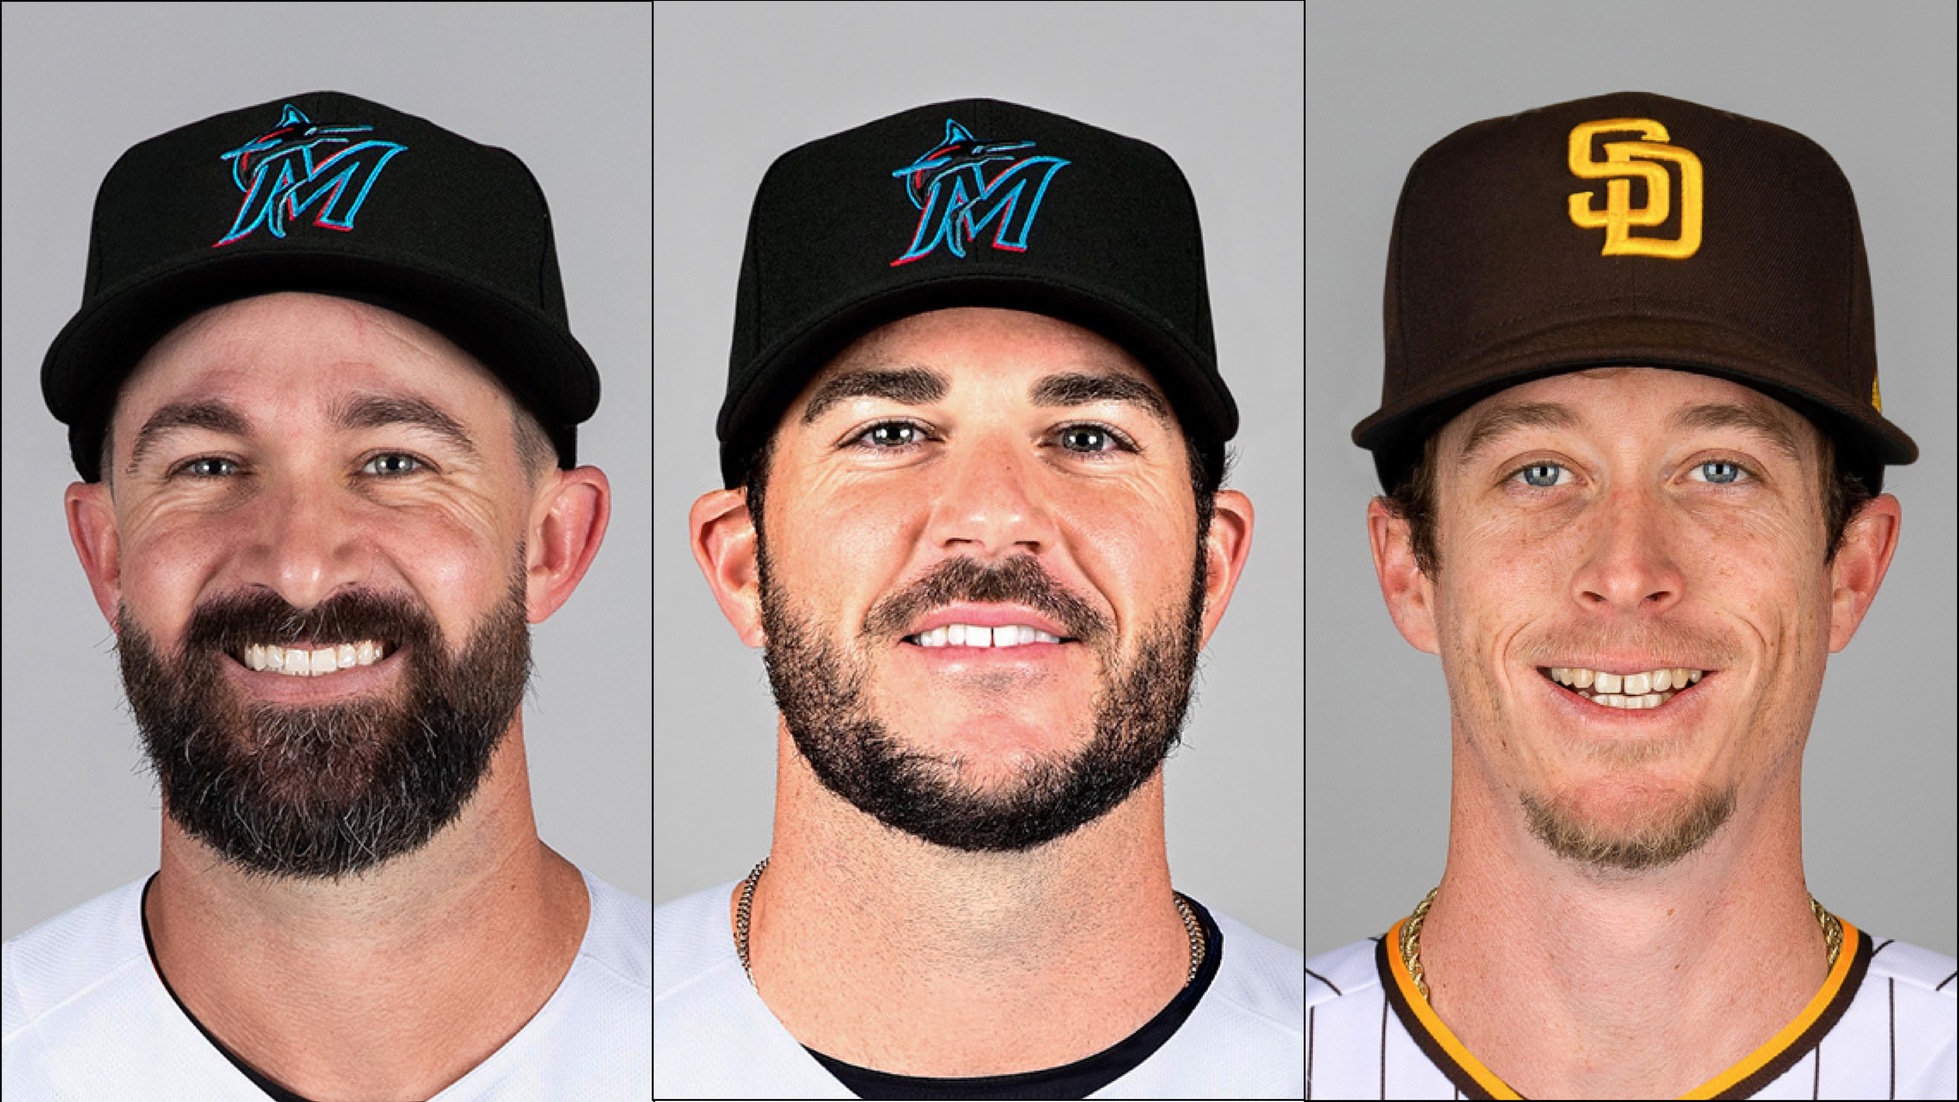 Nick Vincent (left), James Hoyt (center) and Tim Hill (right) helped their teams to the MBL NL Divisional Series beginning Tuesday. Photos by MLB.com.